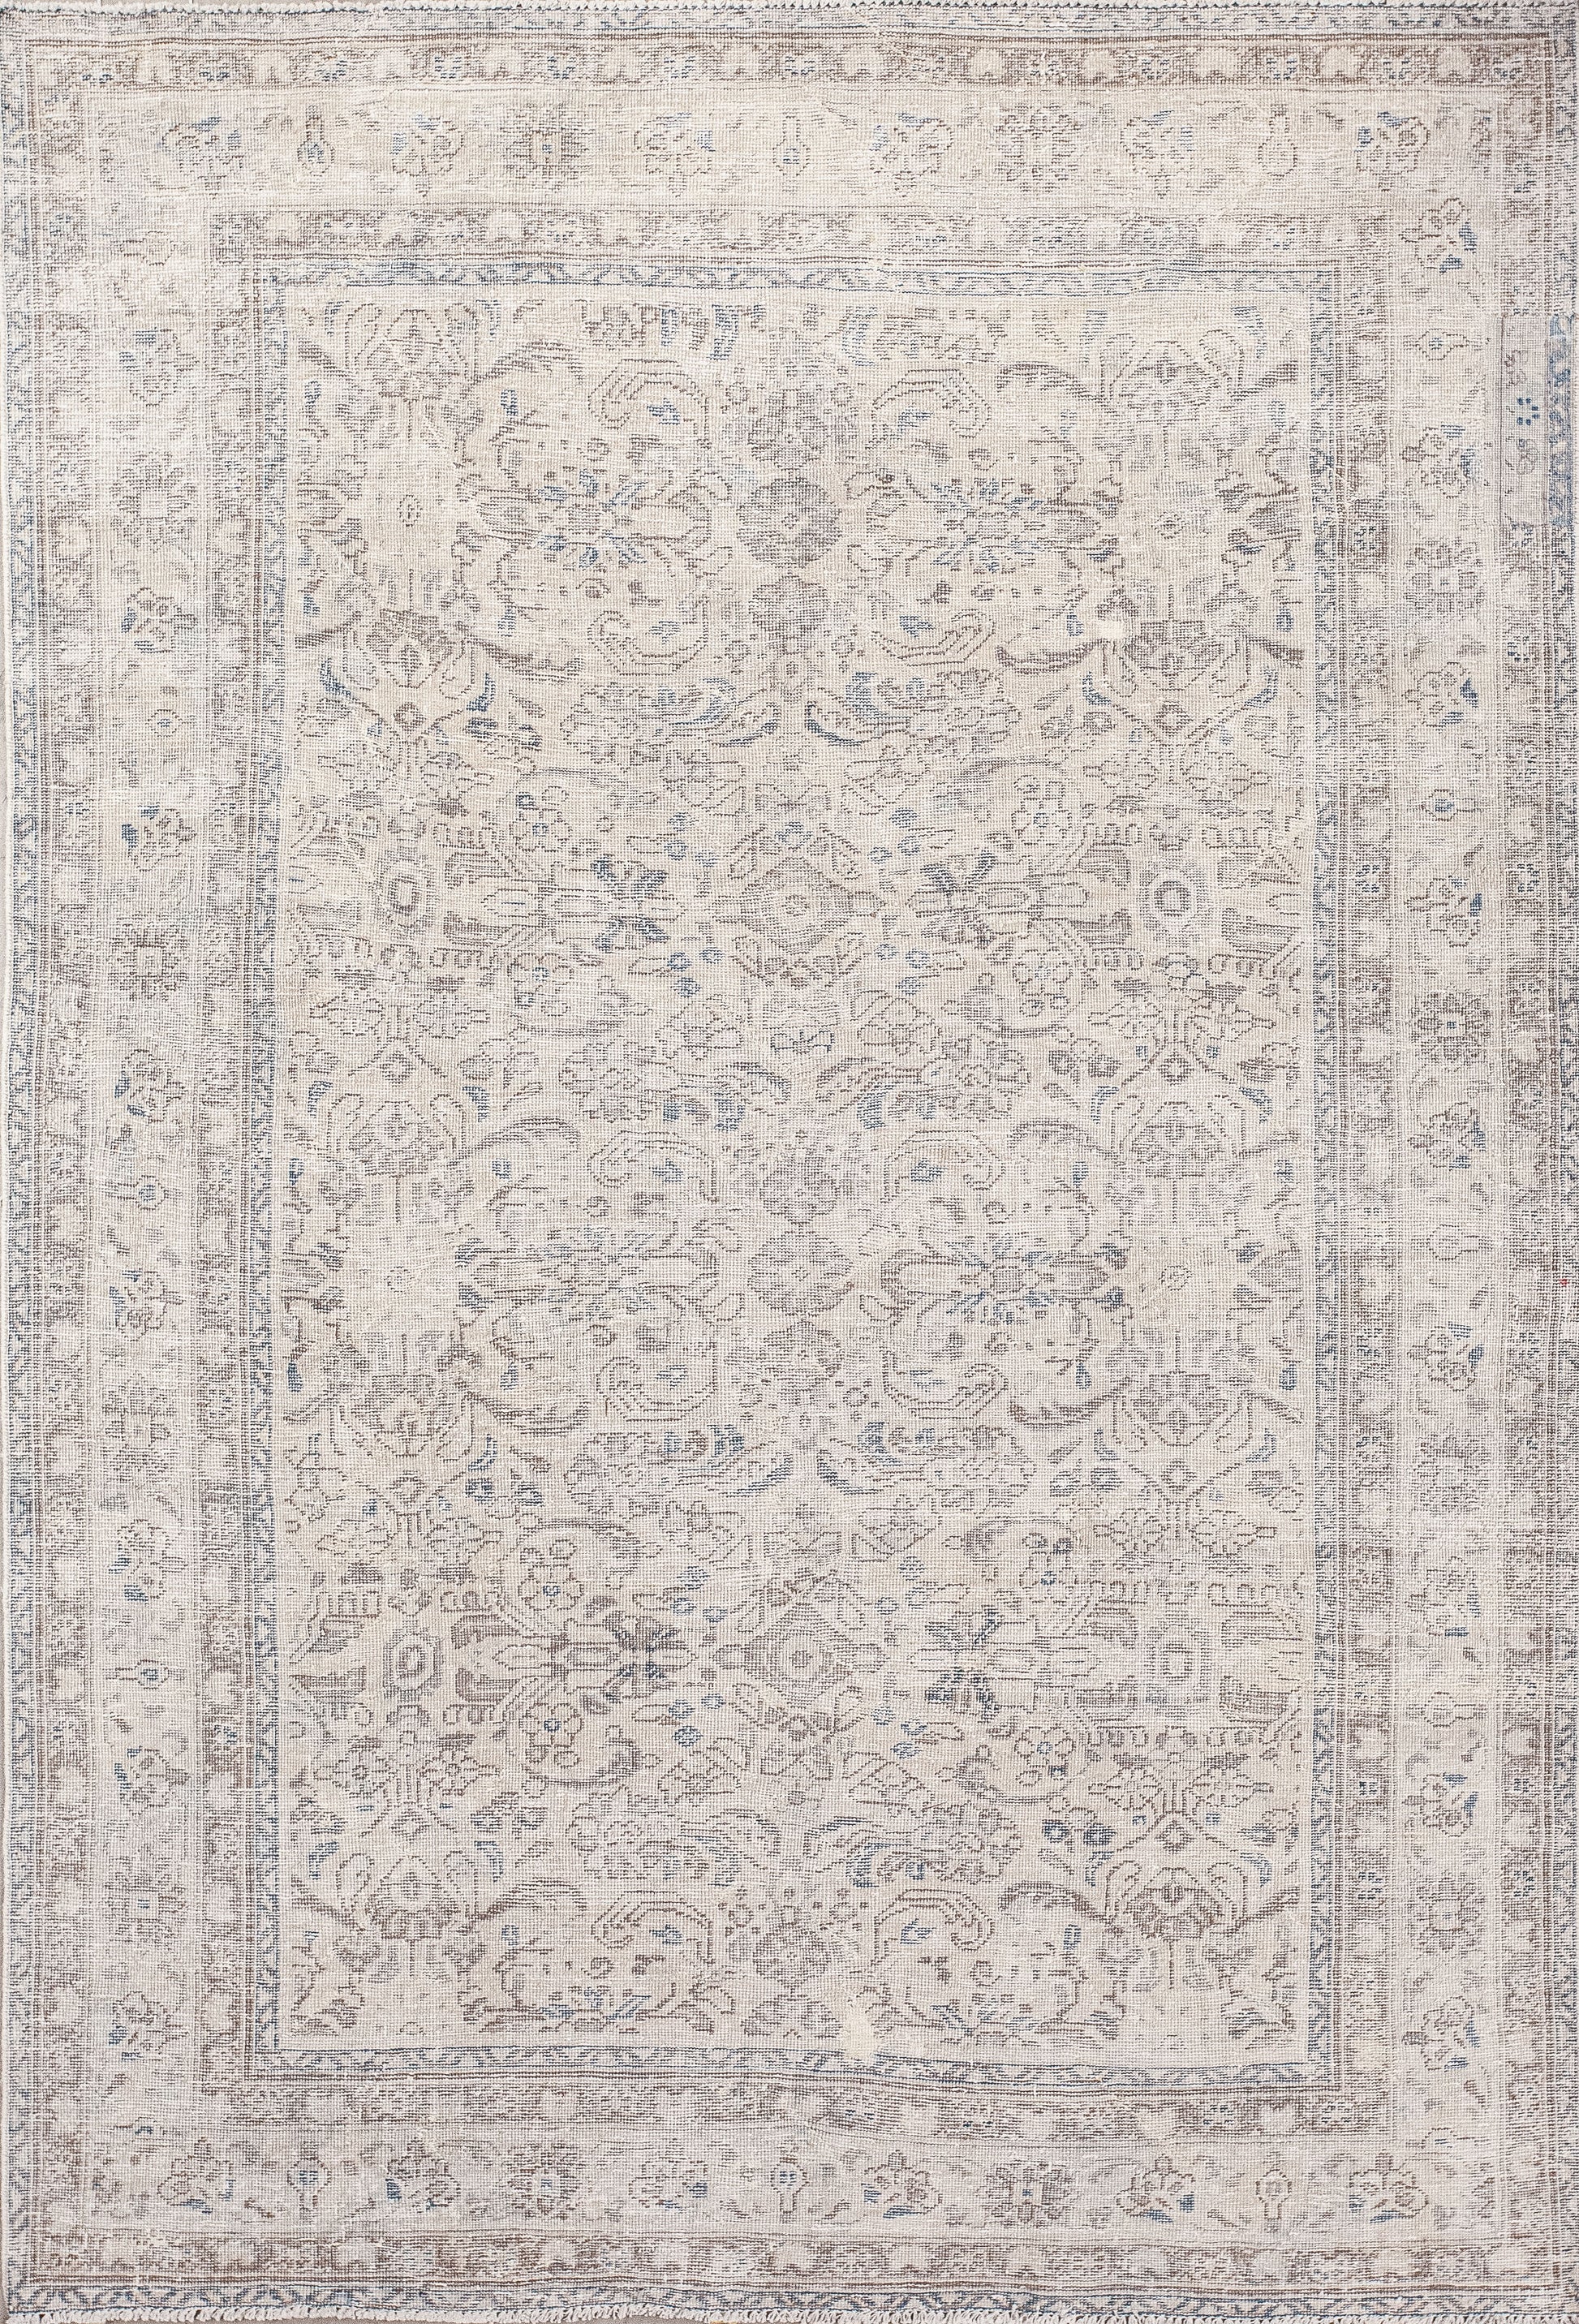 Vintage rug was woven with beige background and a floral pattern. Also, this elegant carpet comes with leaves and geometrical figures in blue and light brown.